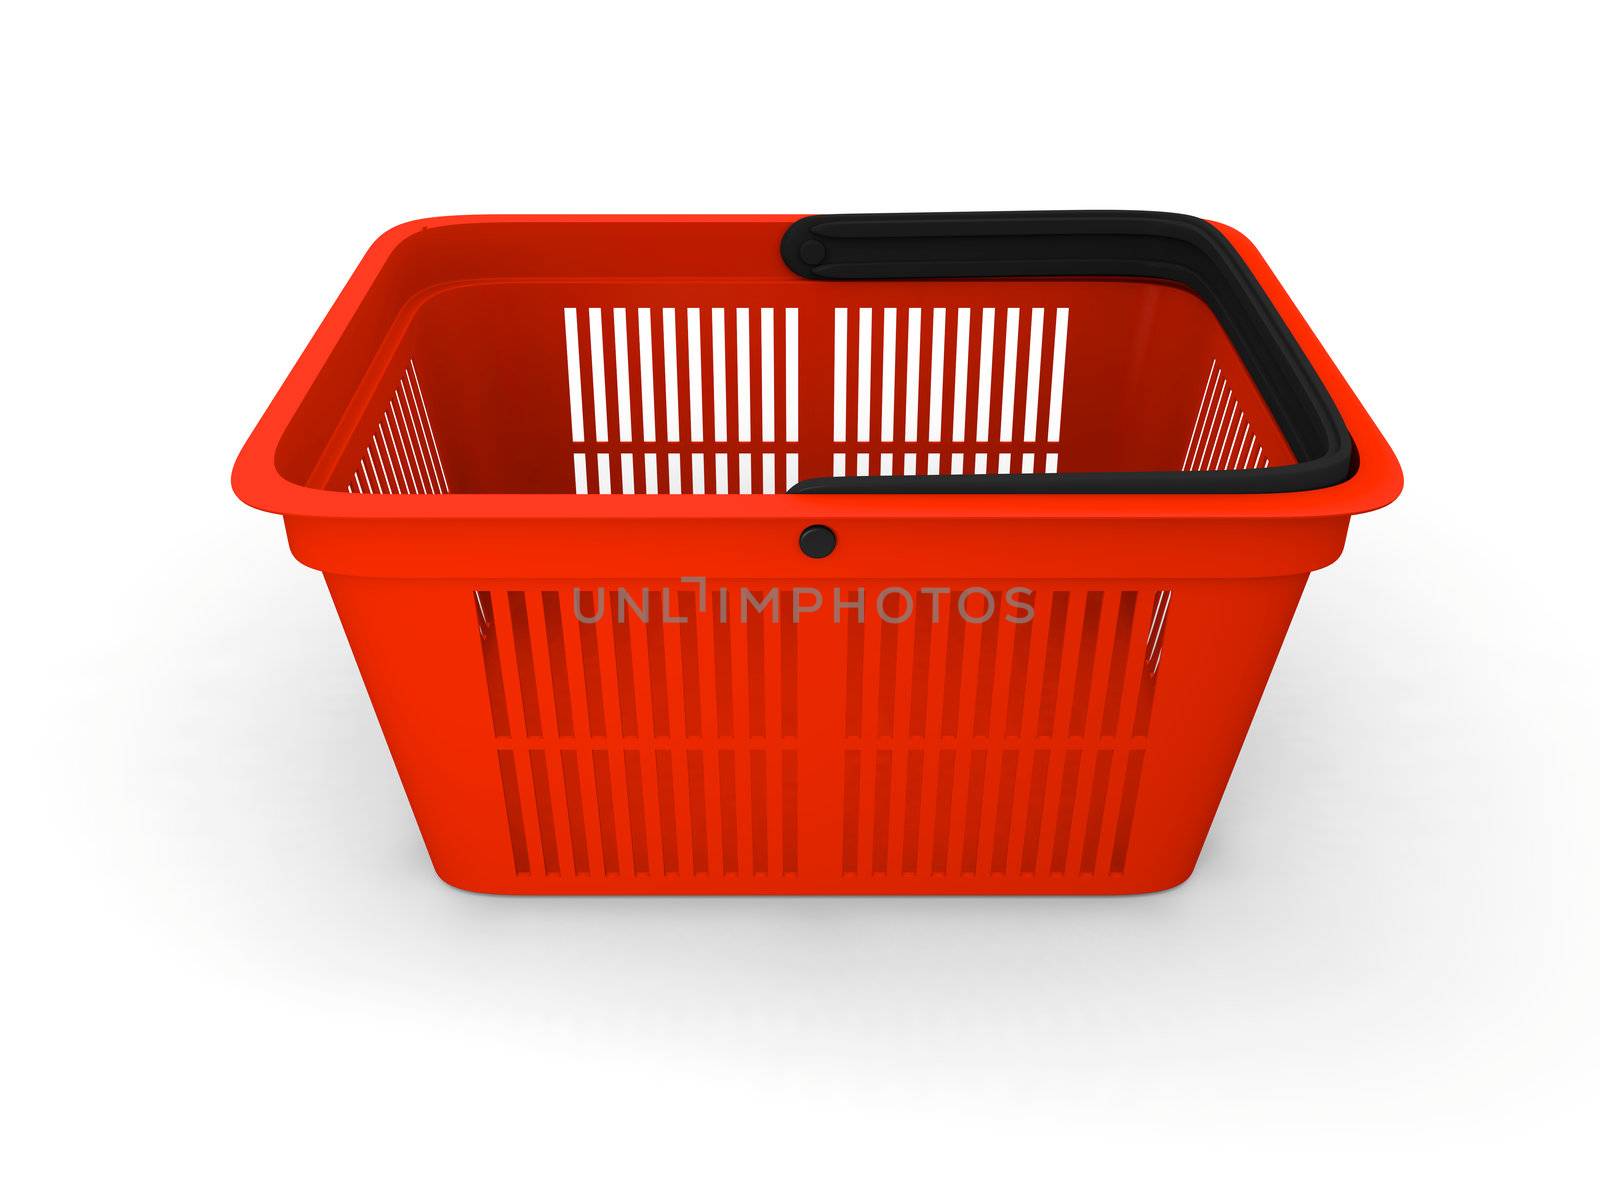 Shopping basket by Harvepino